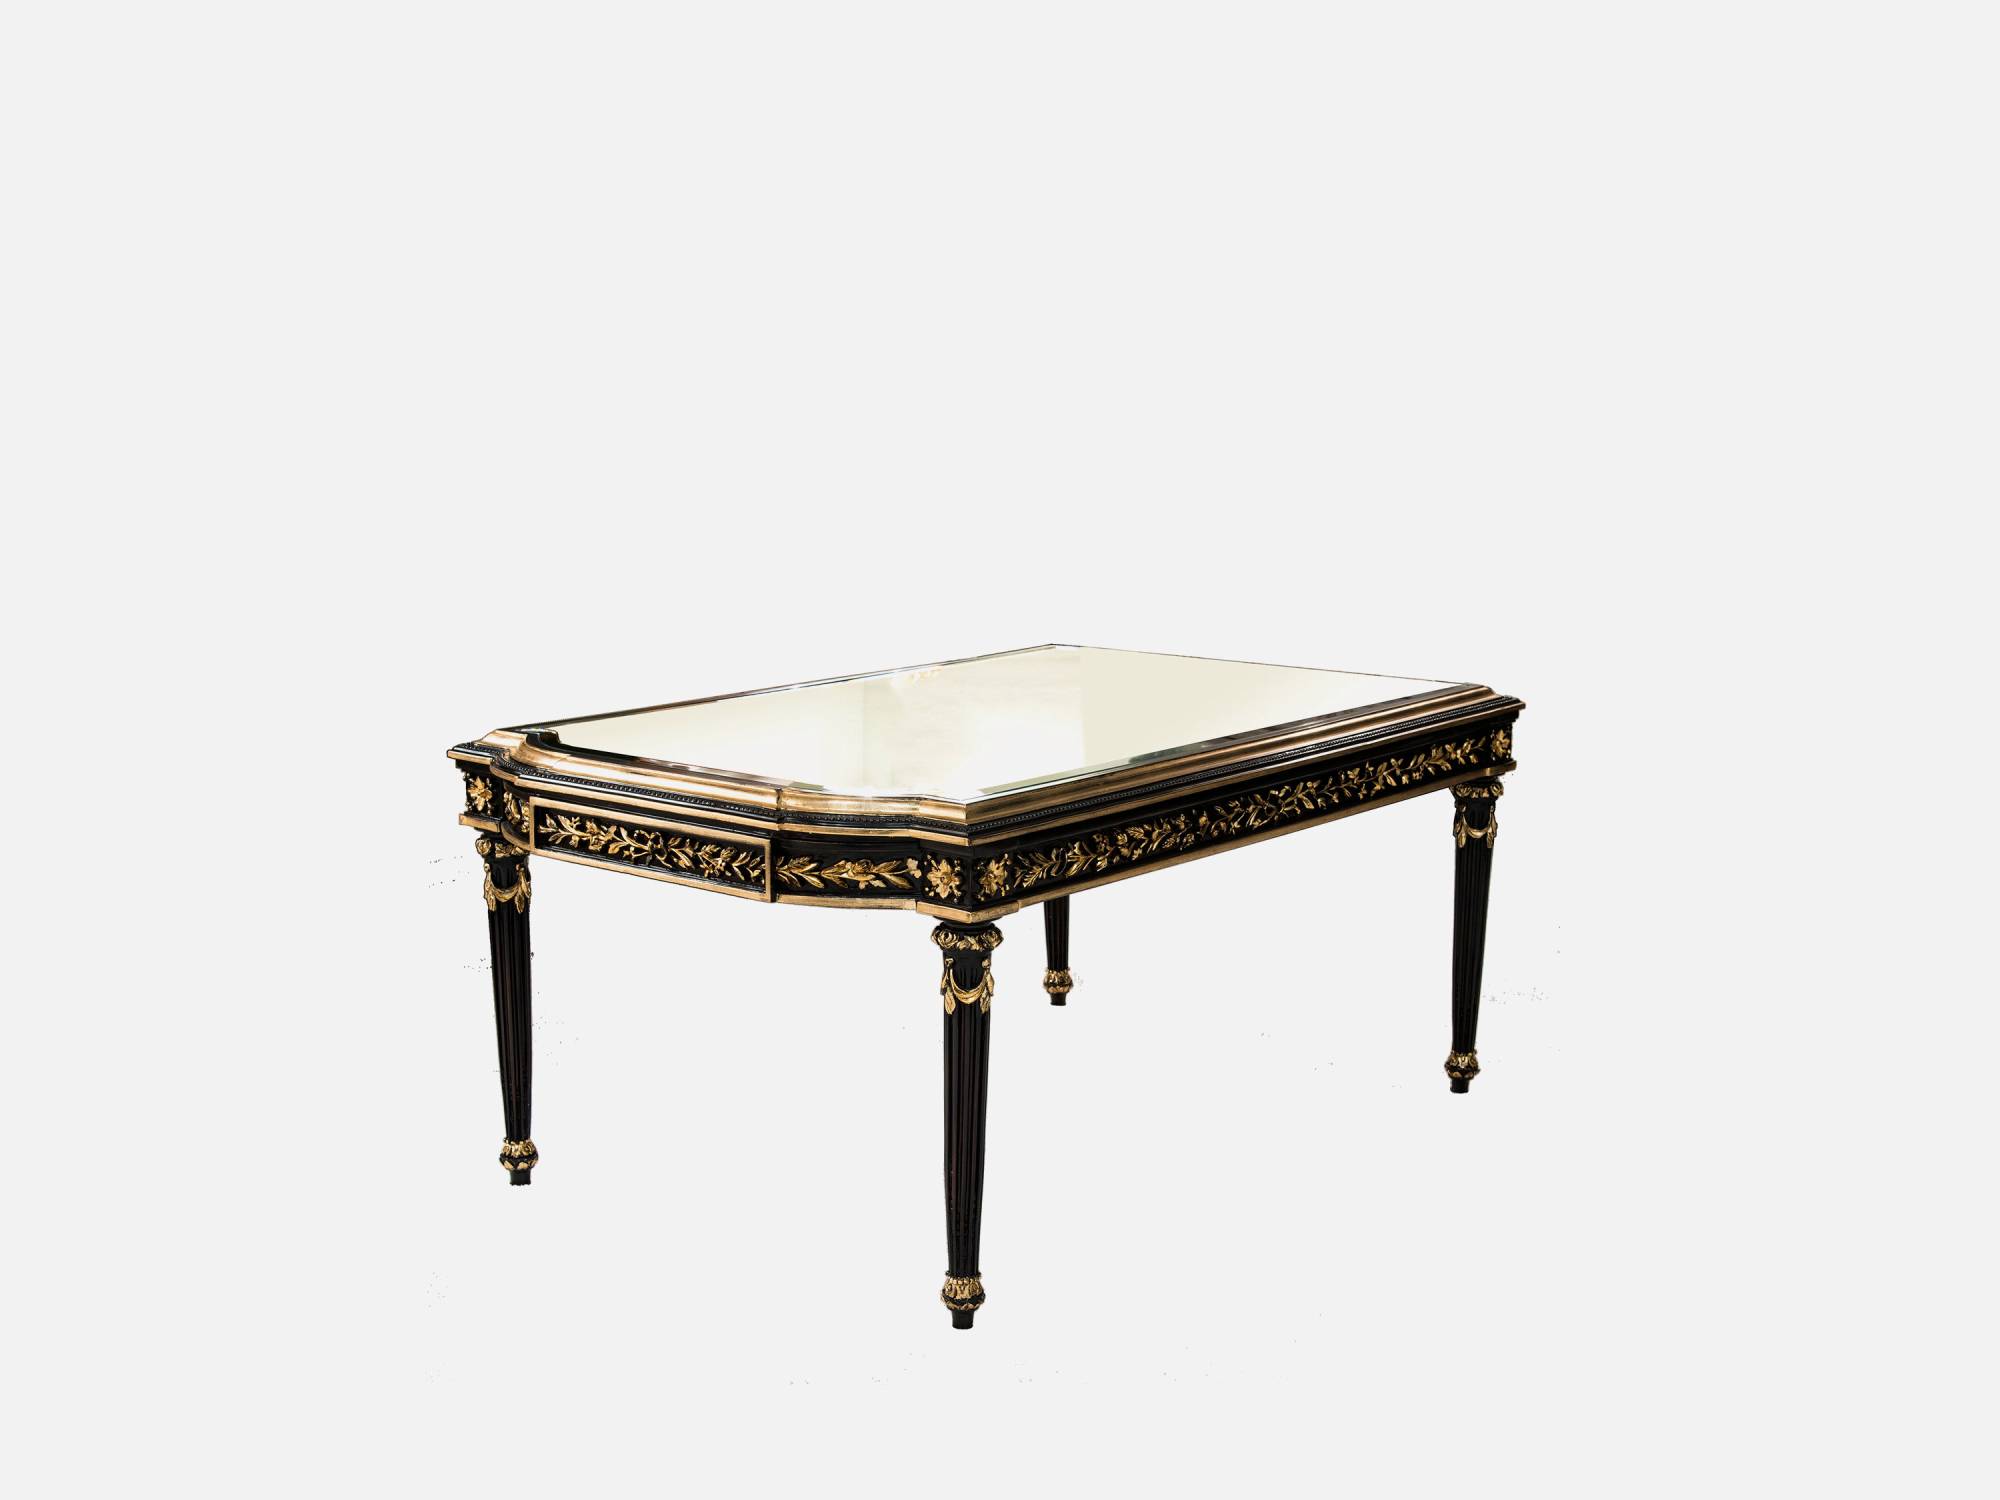 ART. 2228 – The elegance of luxury classic Small tables made in Italy by C.G. Capelletti.